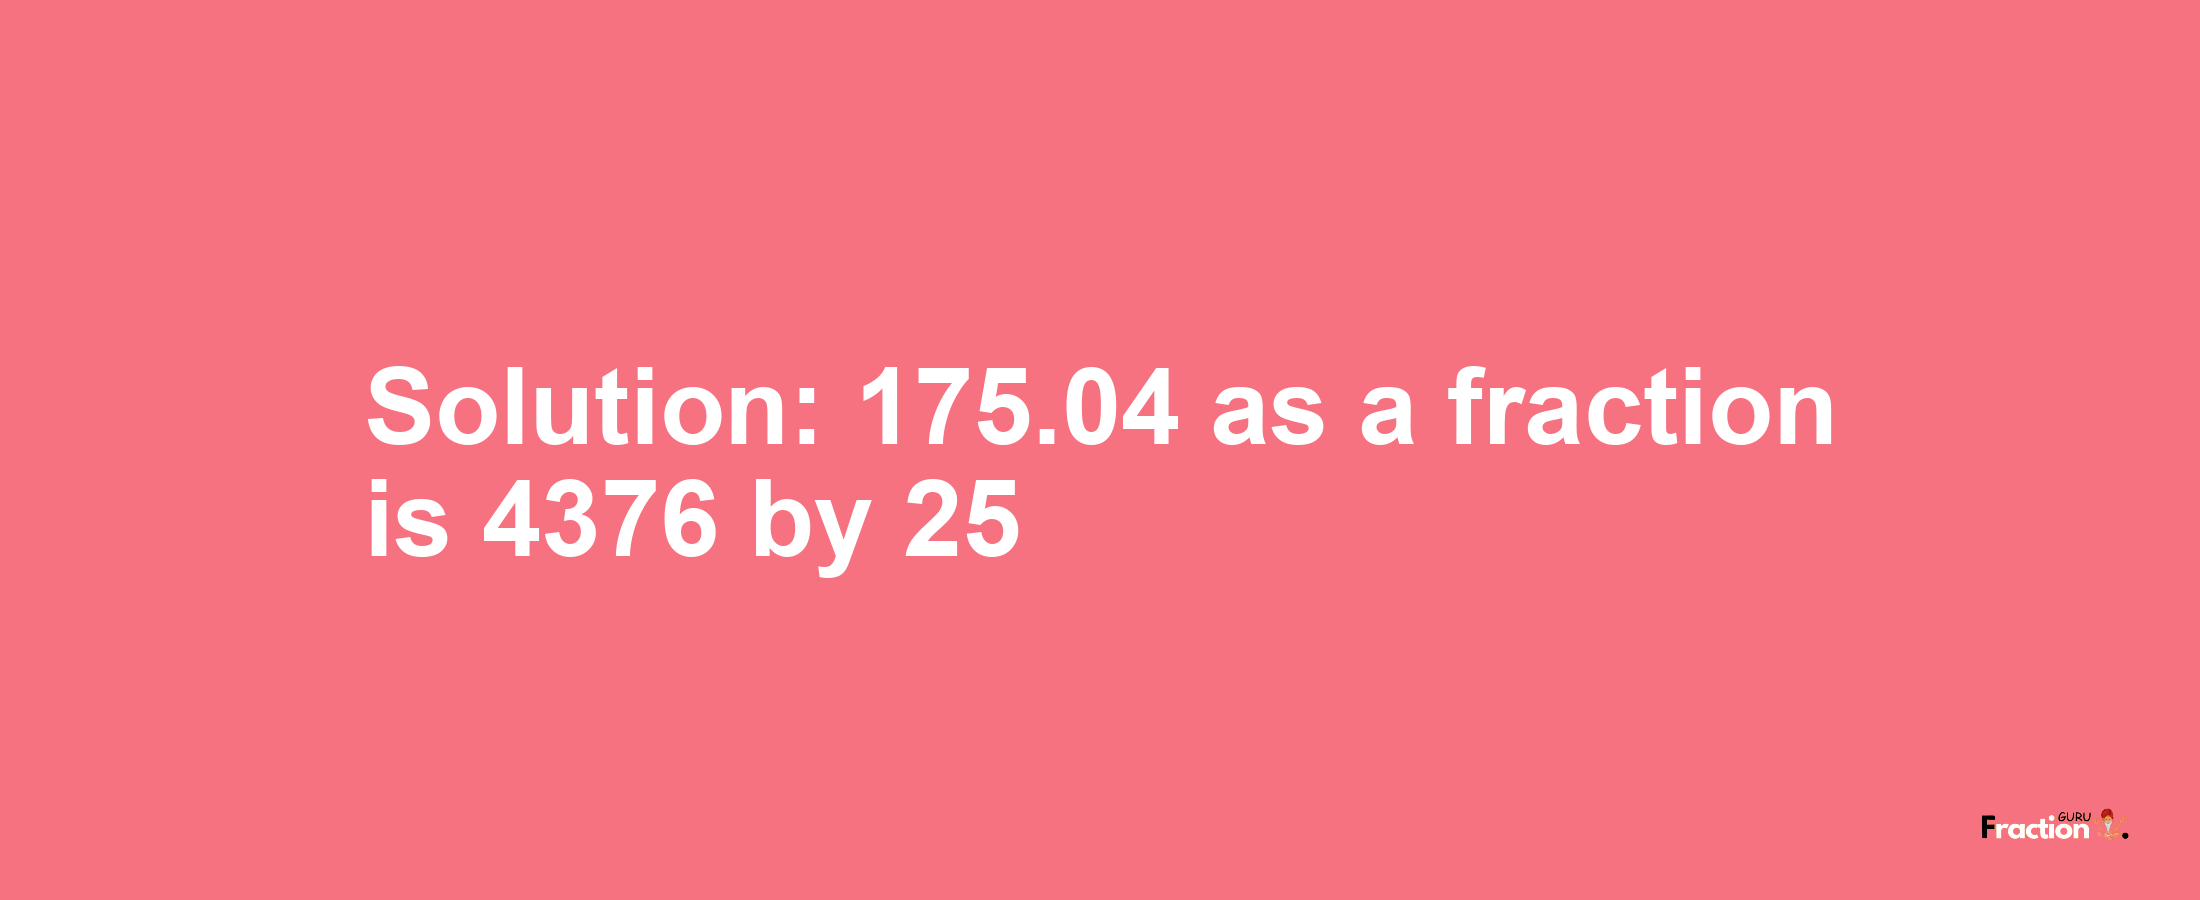 Solution:175.04 as a fraction is 4376/25